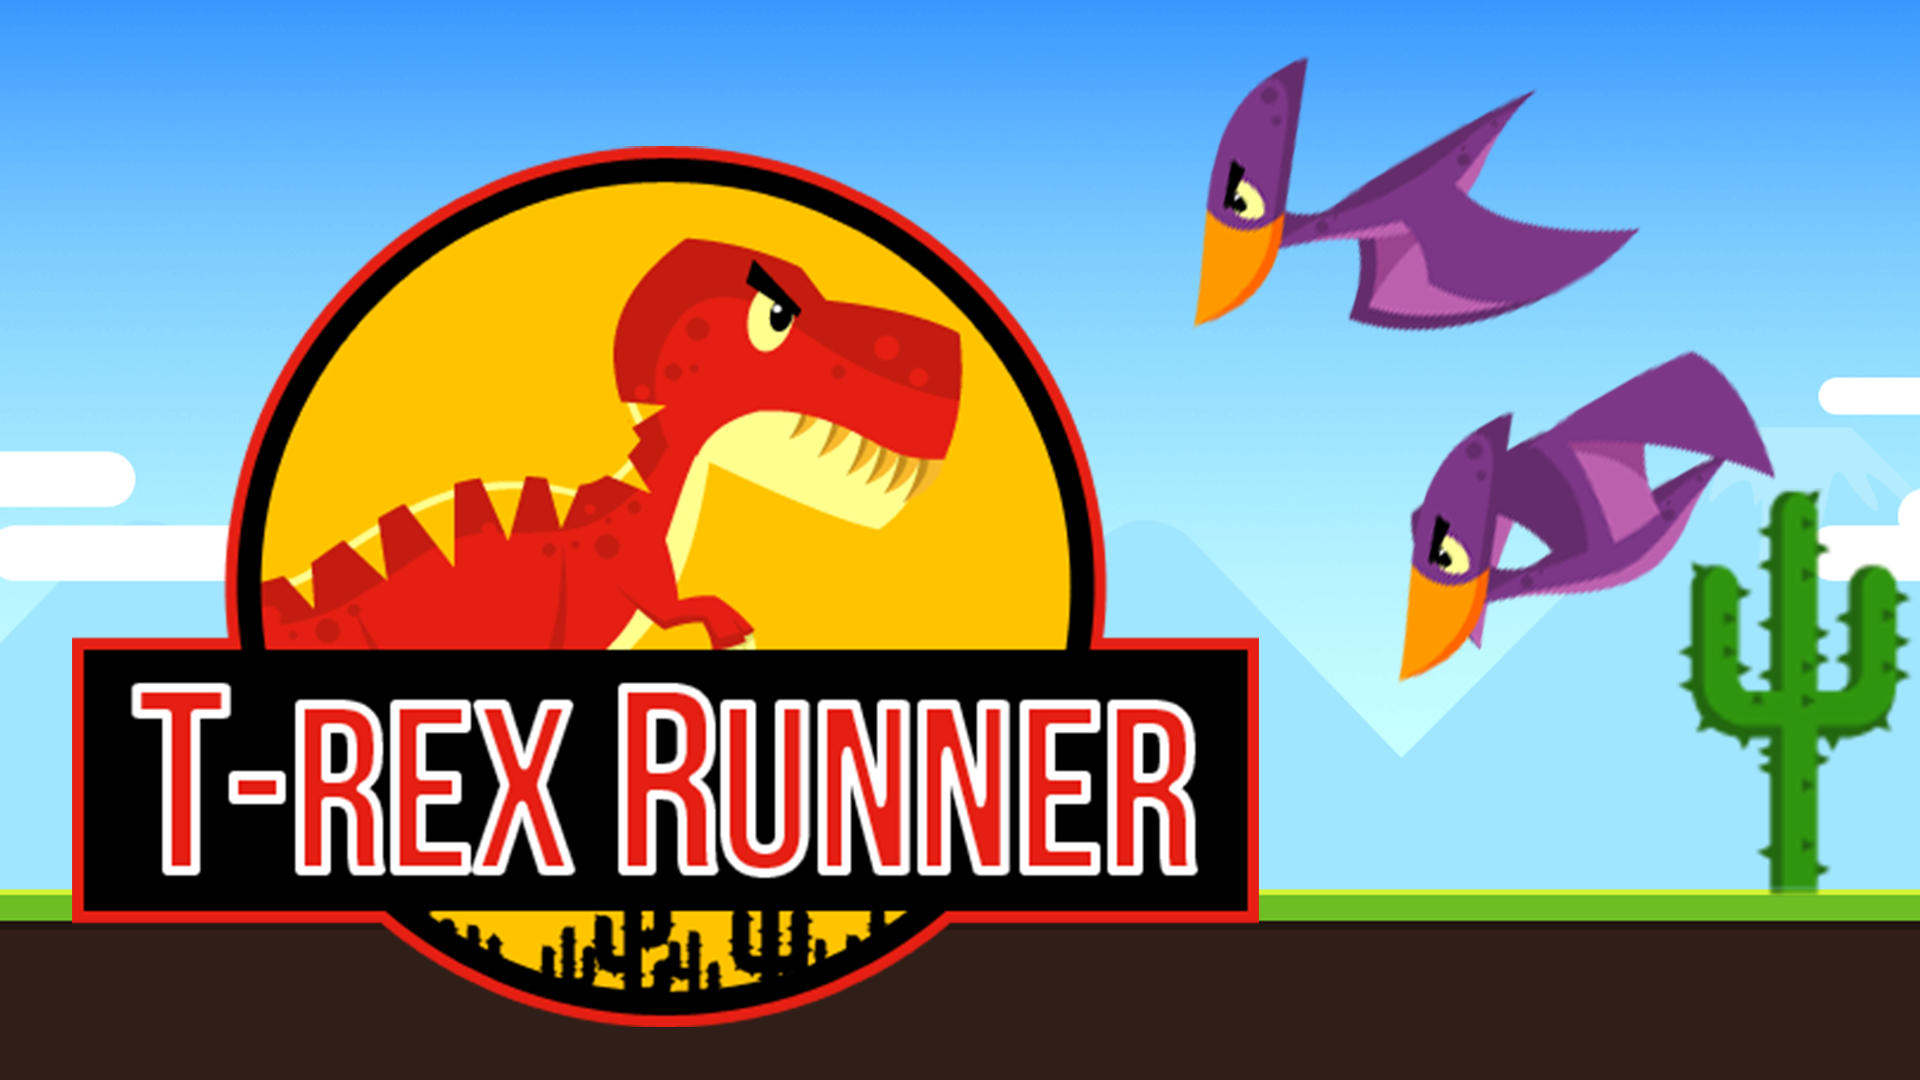 What is the highest ever score in the T.Rex game which runs when